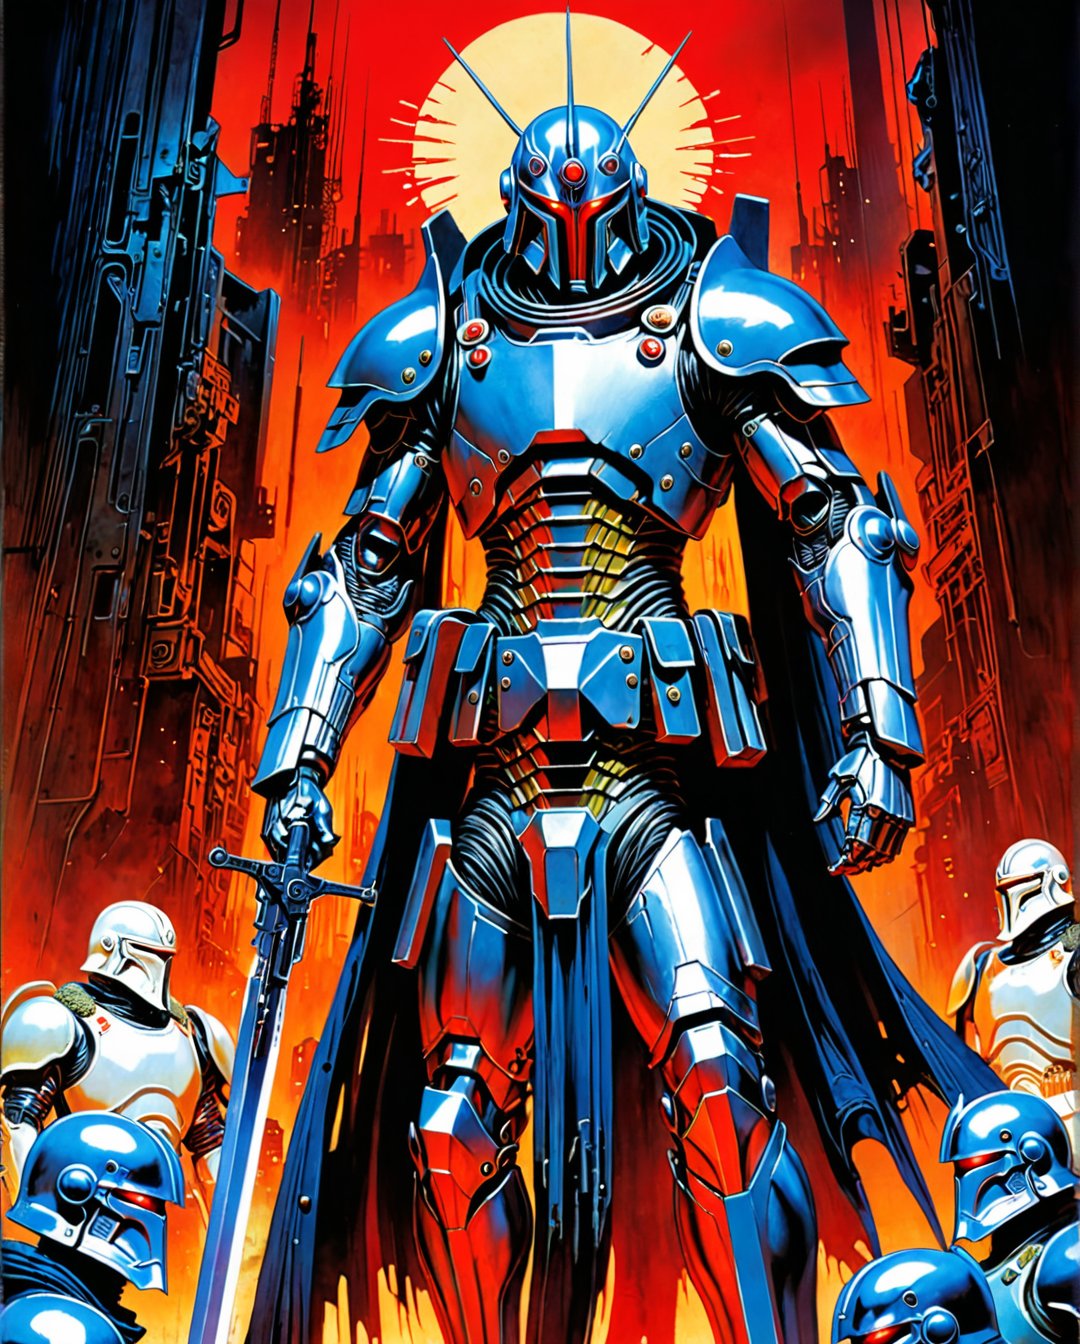 Art style by amano yoshitaka, In a dystopian cyberpunk future, a mesmerizing propaganda poster beckons viewers to enlist in the military. Combining the gritty art style of Frank Frazetta with the futuristic flair of Moebius, the image features a cybernetically enhanced soldier, clad in sleek, reflective armor and wielding cutting-edge weapons. The intricate detailing, vivid colors, and dynamic composition elevate this digital painting to a level of unparalleled artistry, capturing the essence of a war-torn, technologically advanced world with stunning precision., 1990s (style), in the style of nicola samori, detailed 8k horror artwork,
art by Tsutomu Nihei gerald-brom